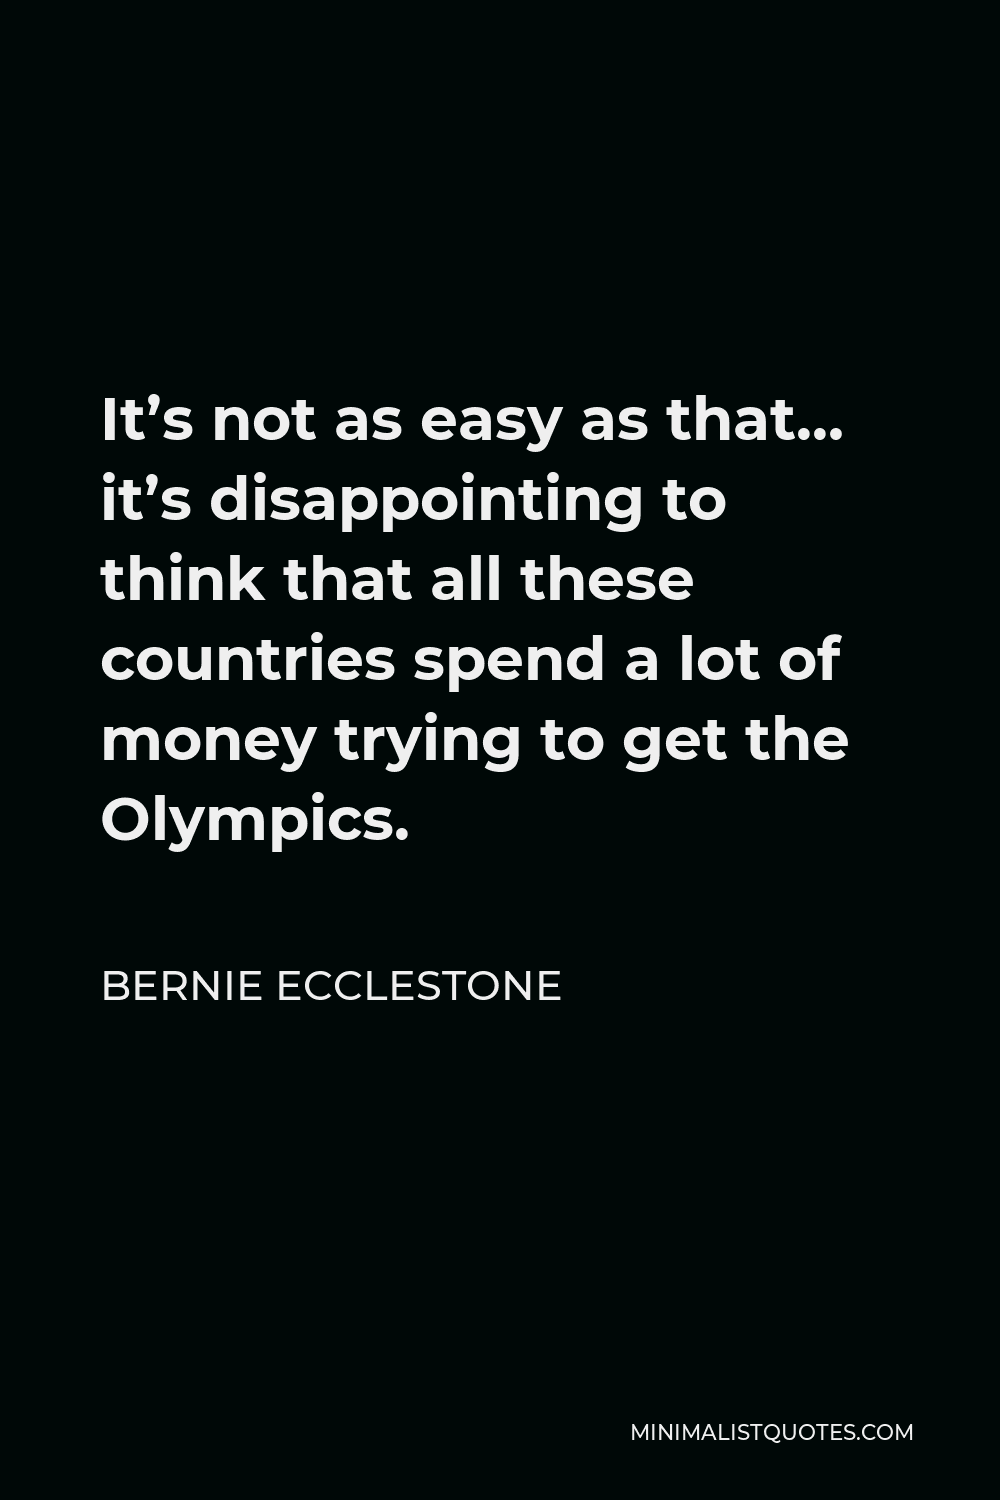 Bernie Ecclestone Quote - It’s not as easy as that… it’s disappointing to think that all these countries spend a lot of money trying to get the Olympics.